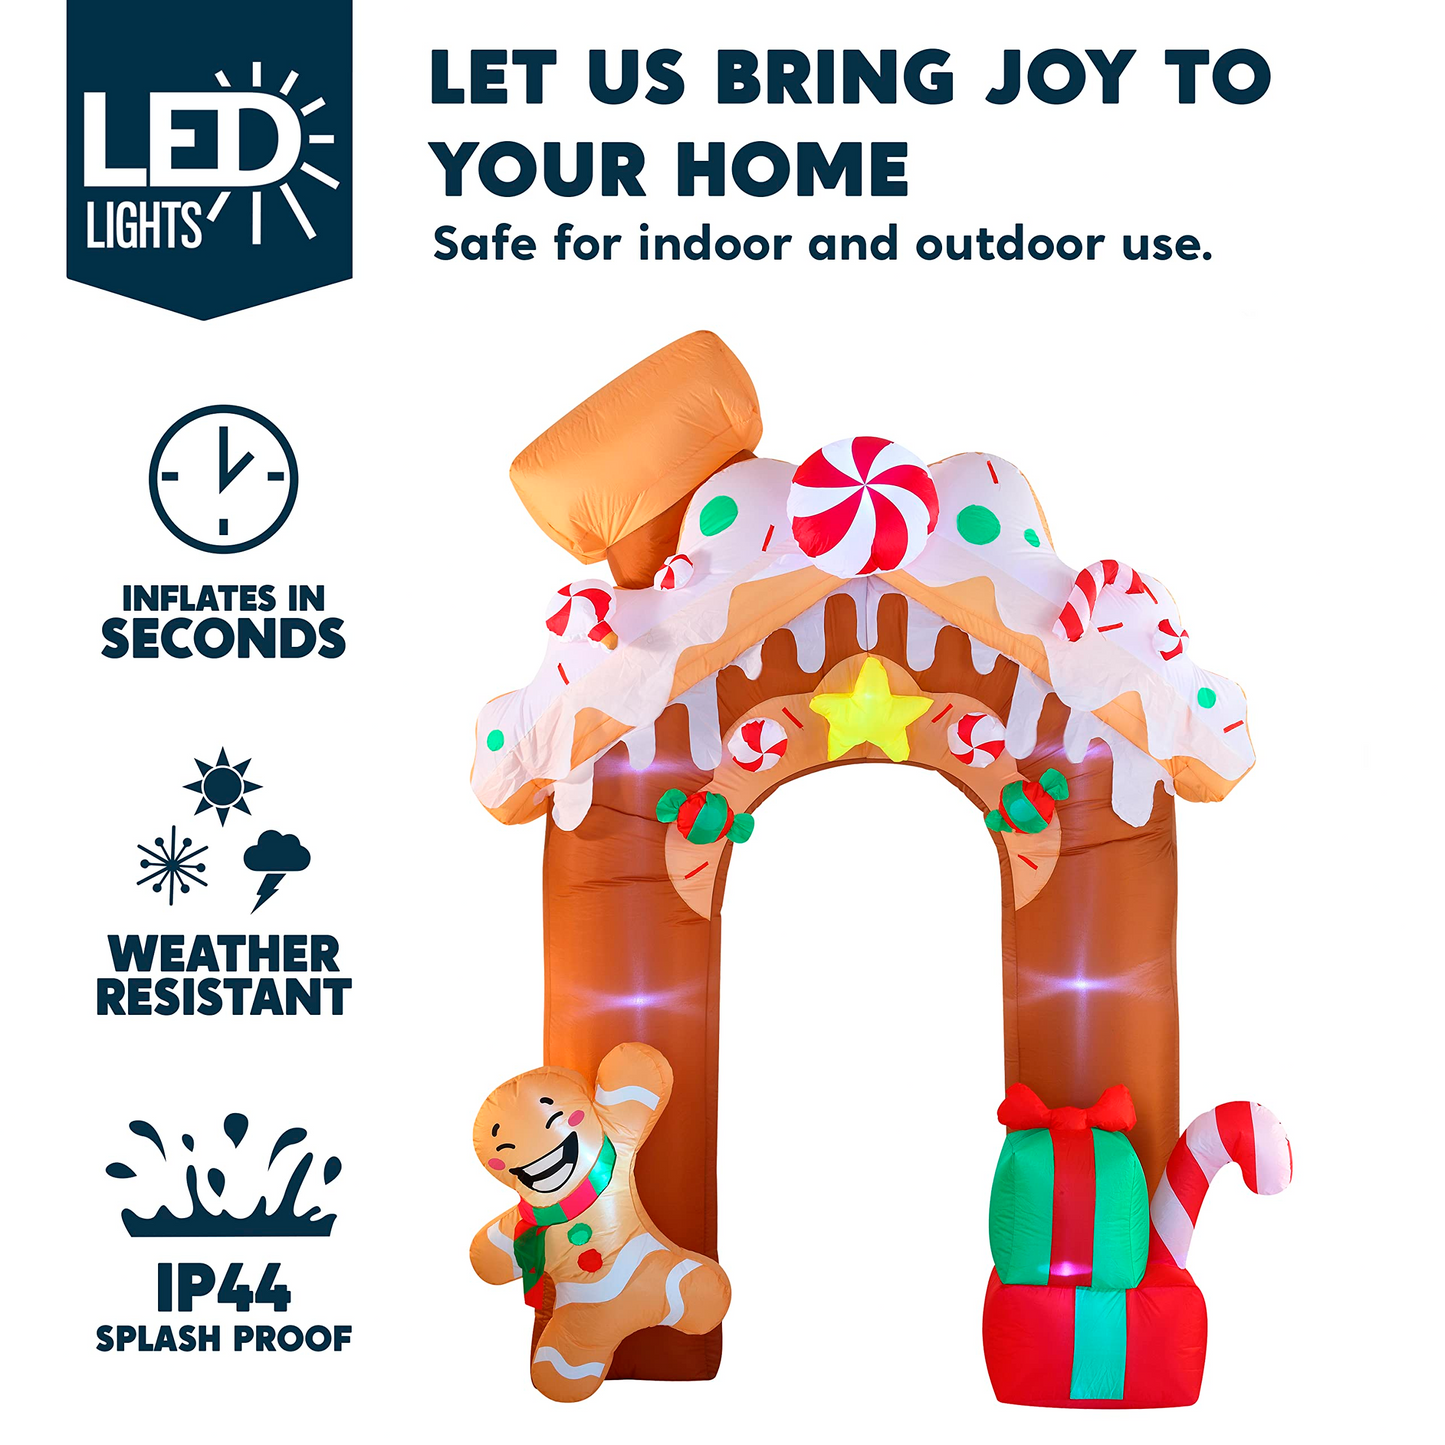 Giant Gingerbread House Archway Inflatable (10 ft)